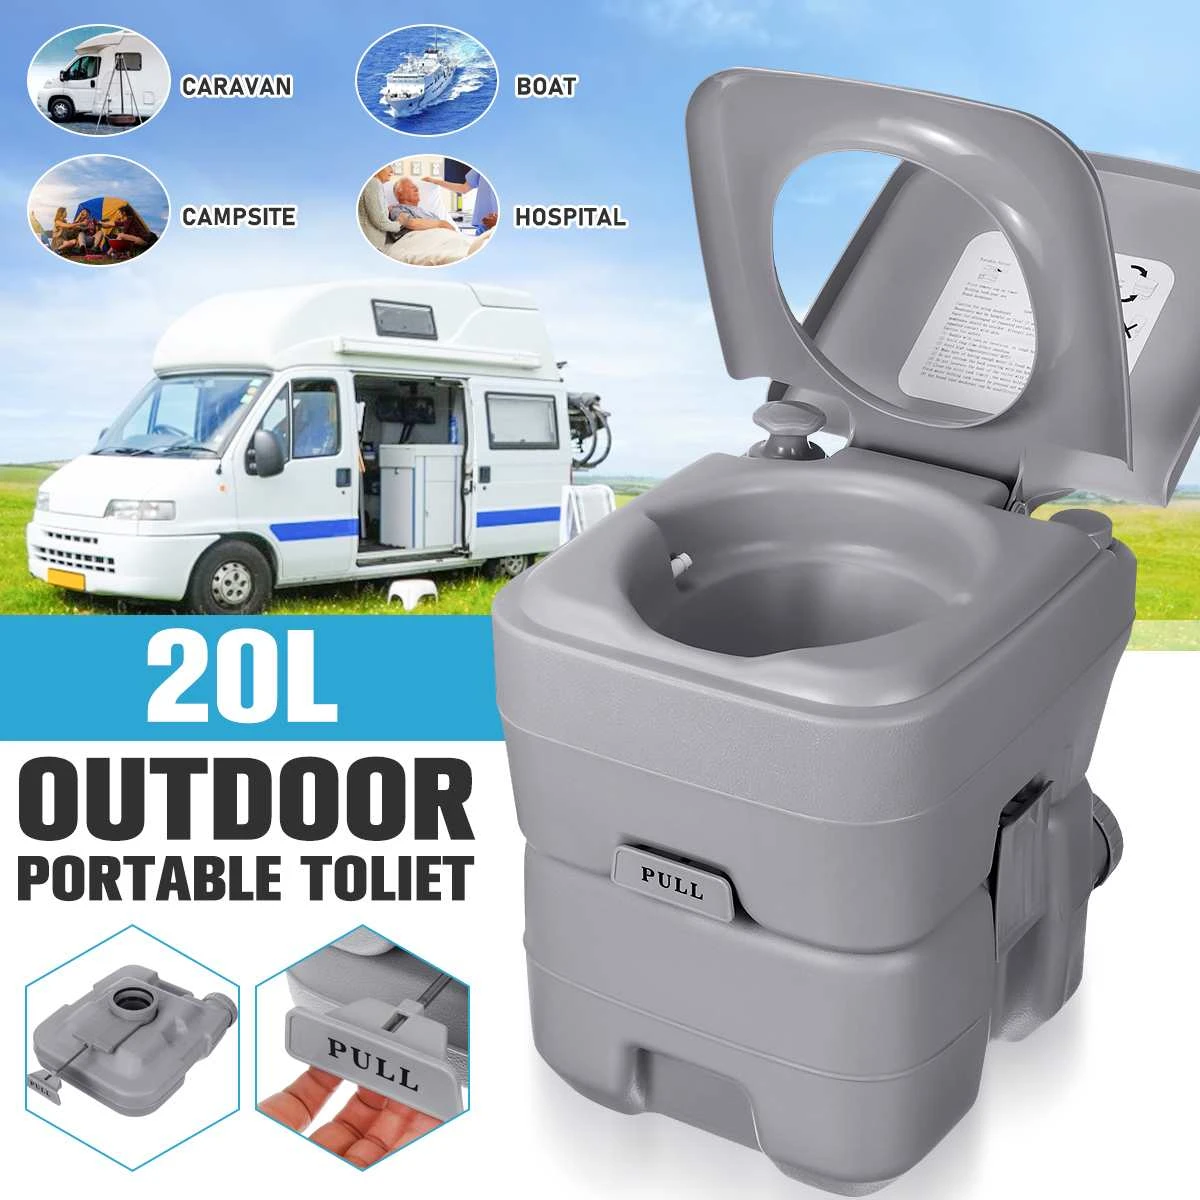 Portable Toilet Outdoor Camping Load 130kg Adult Children Mobile Toilet Camping Toilet For Home Hospital Travel Boat 20L 10L